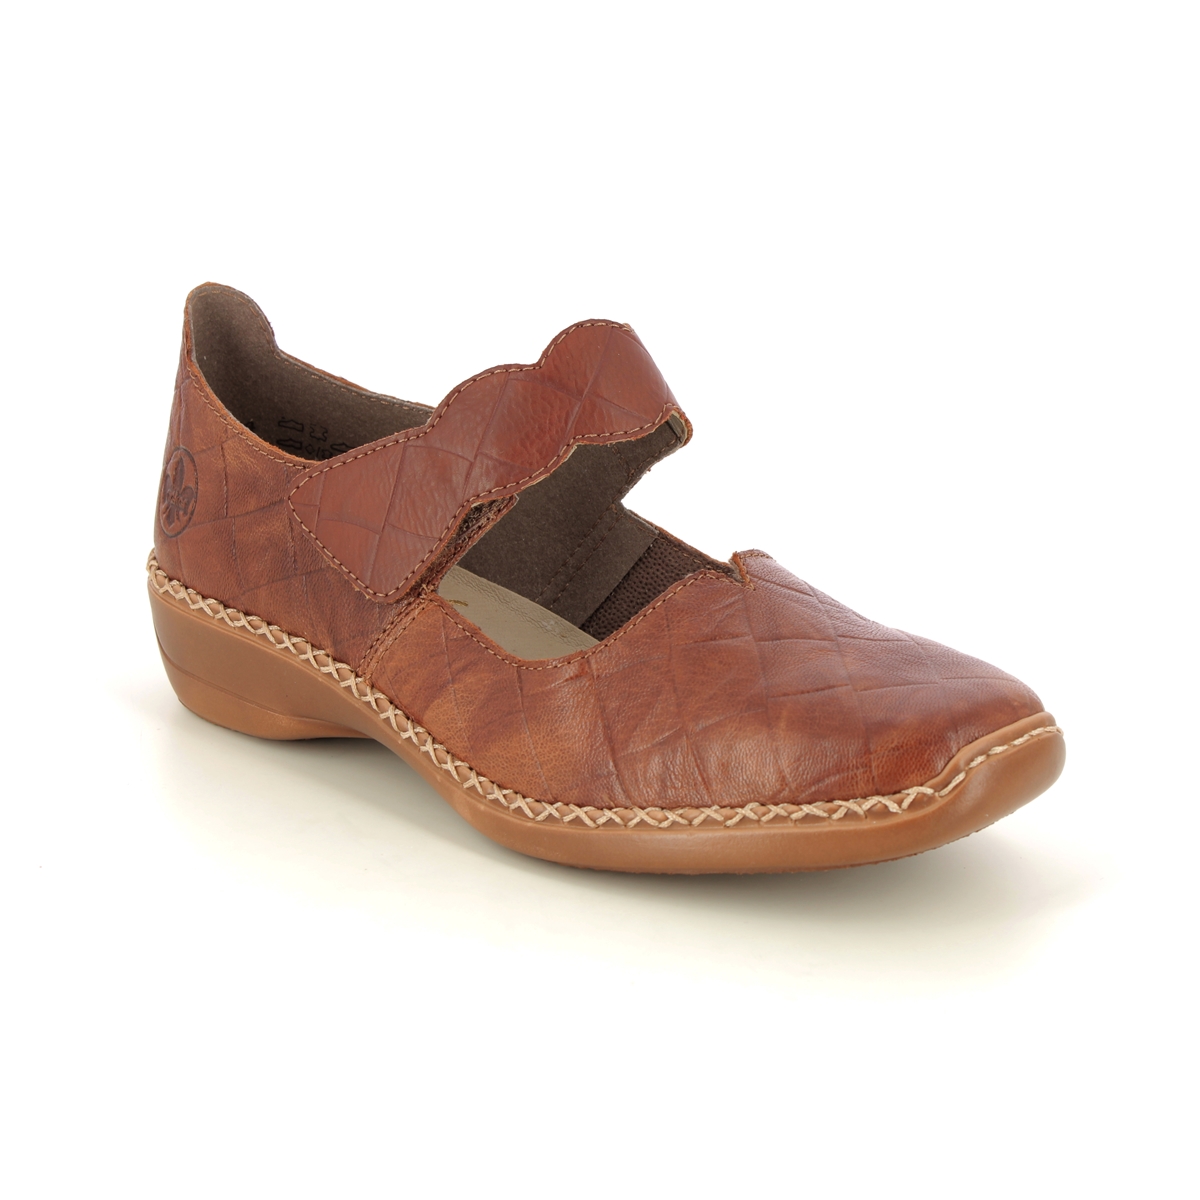 Rieker Dorisbar Tan Leather Womens Mary Jane Shoes 41398-22 In Size 38 In Plain Tan Leather